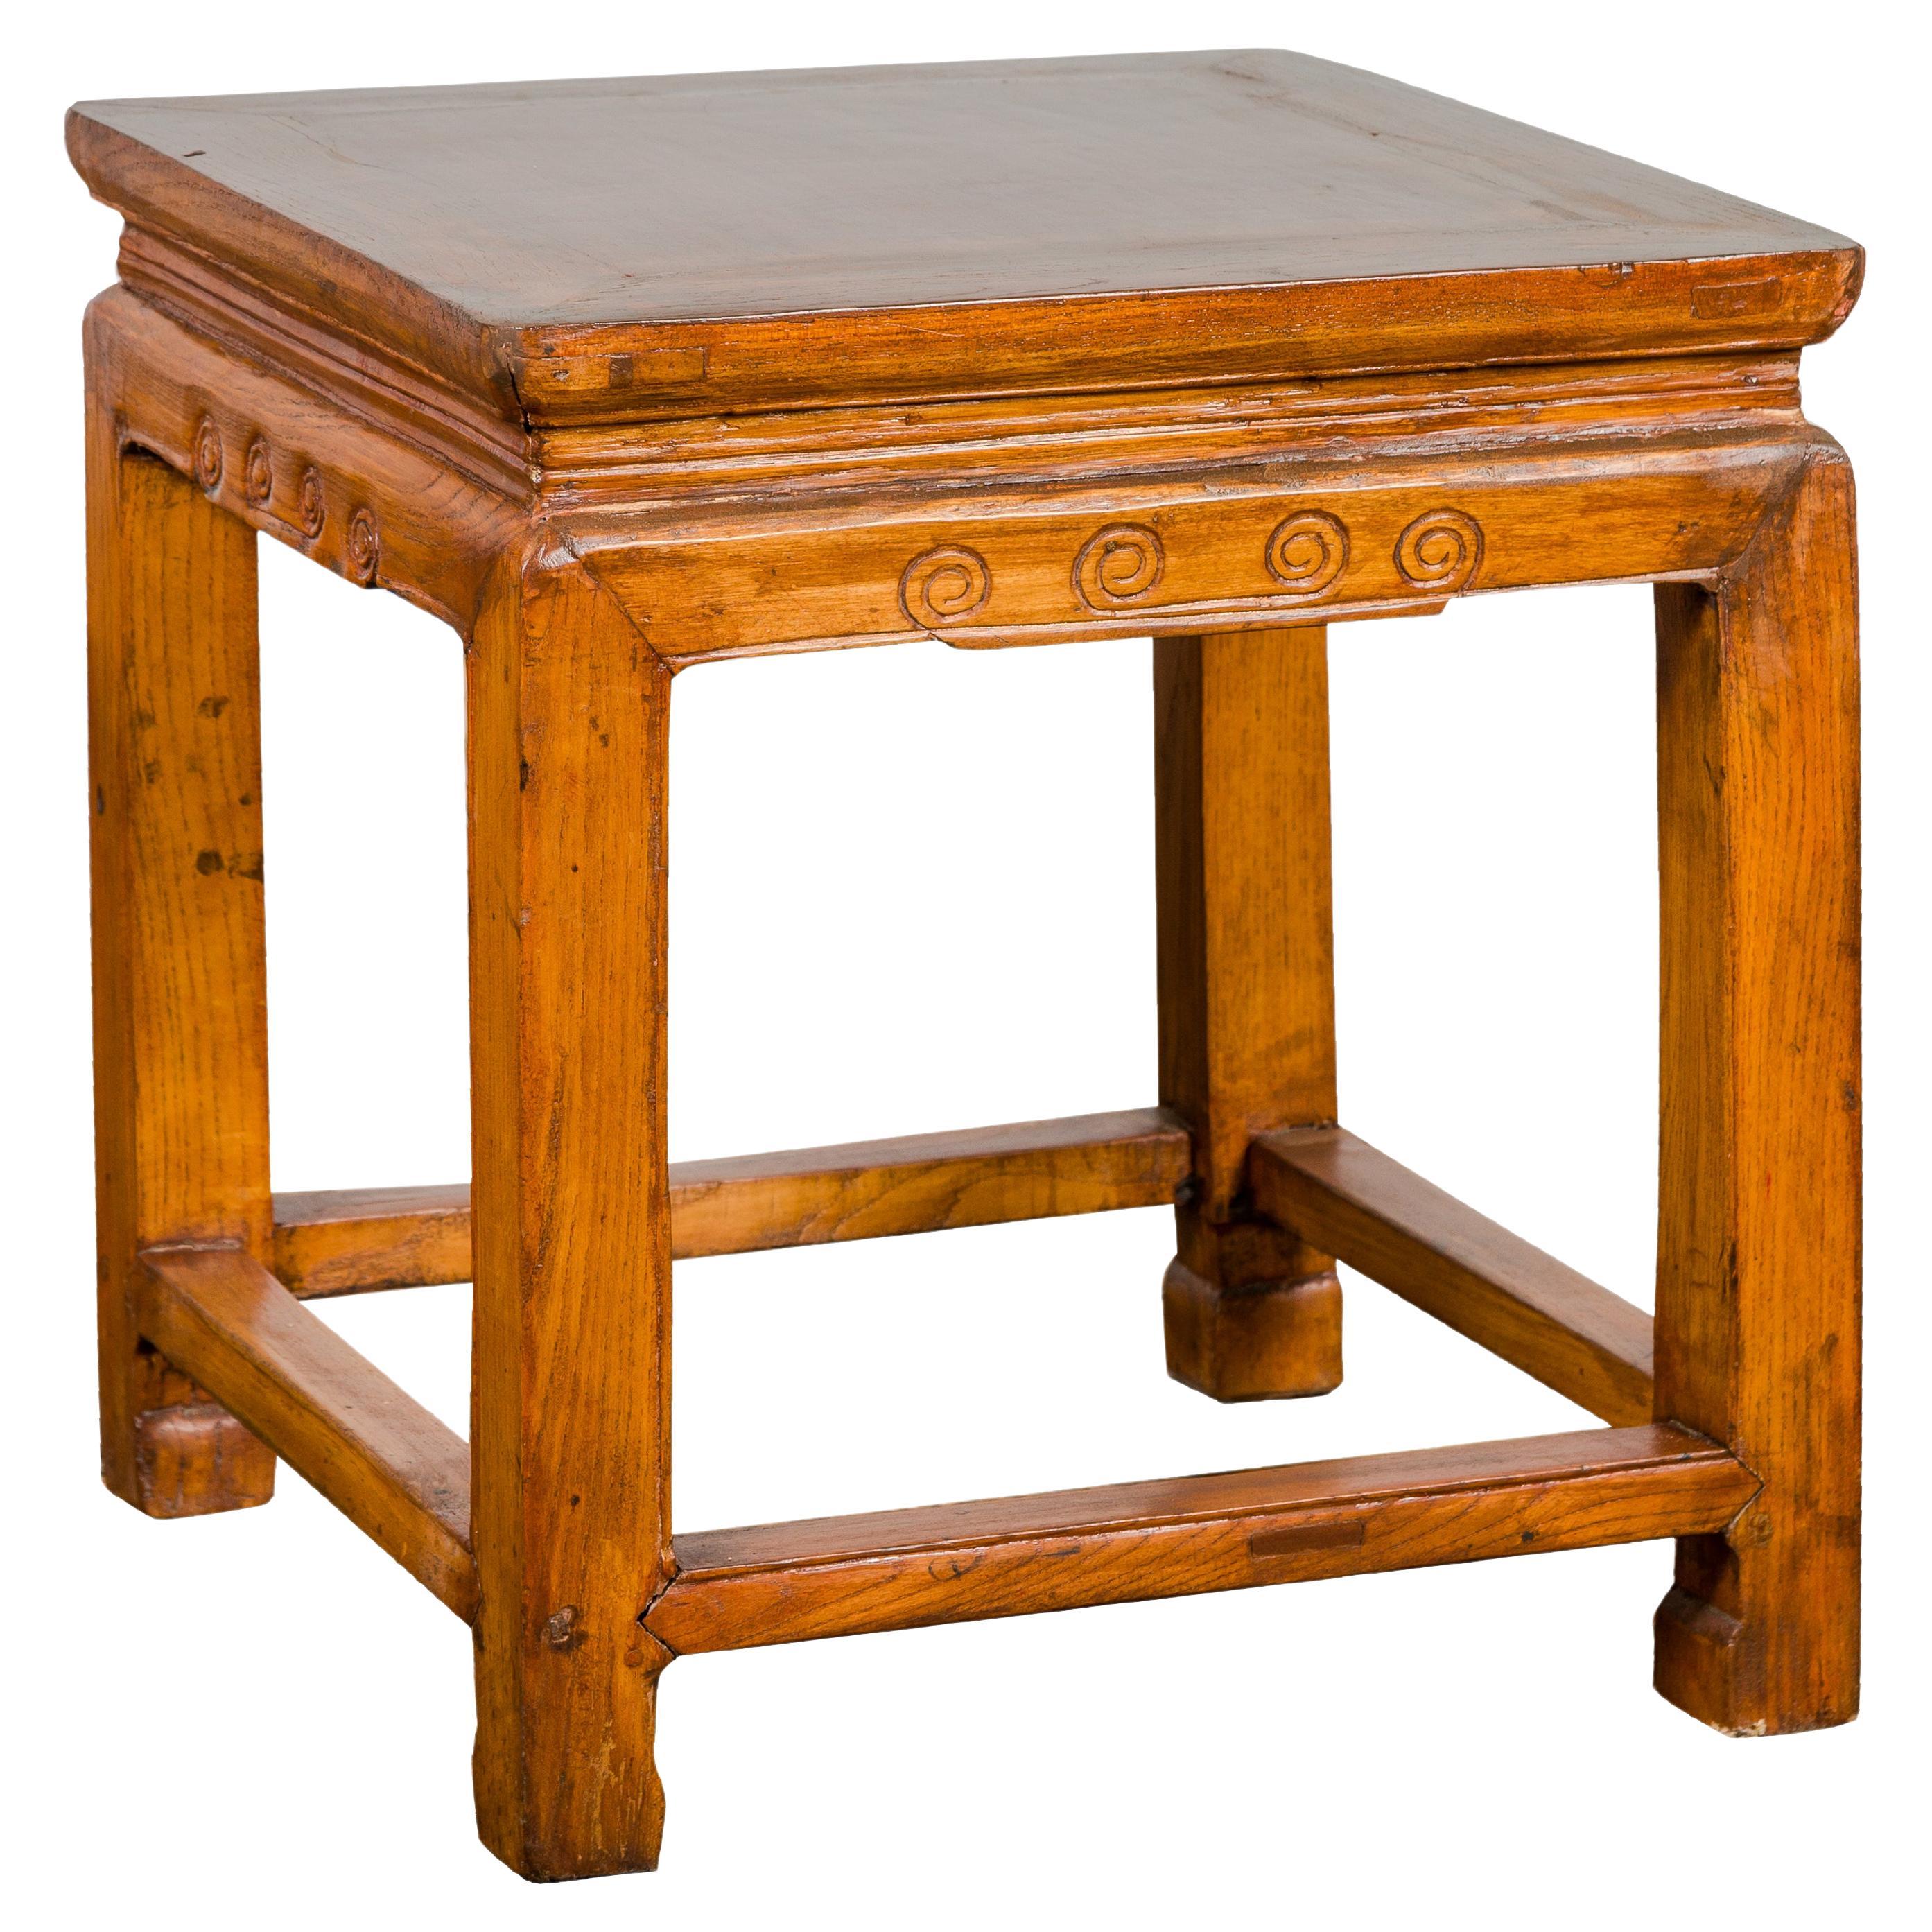 Chinese Elm Qing Dynasty Period Side Table with Horse Hoof Legs and Stretchers